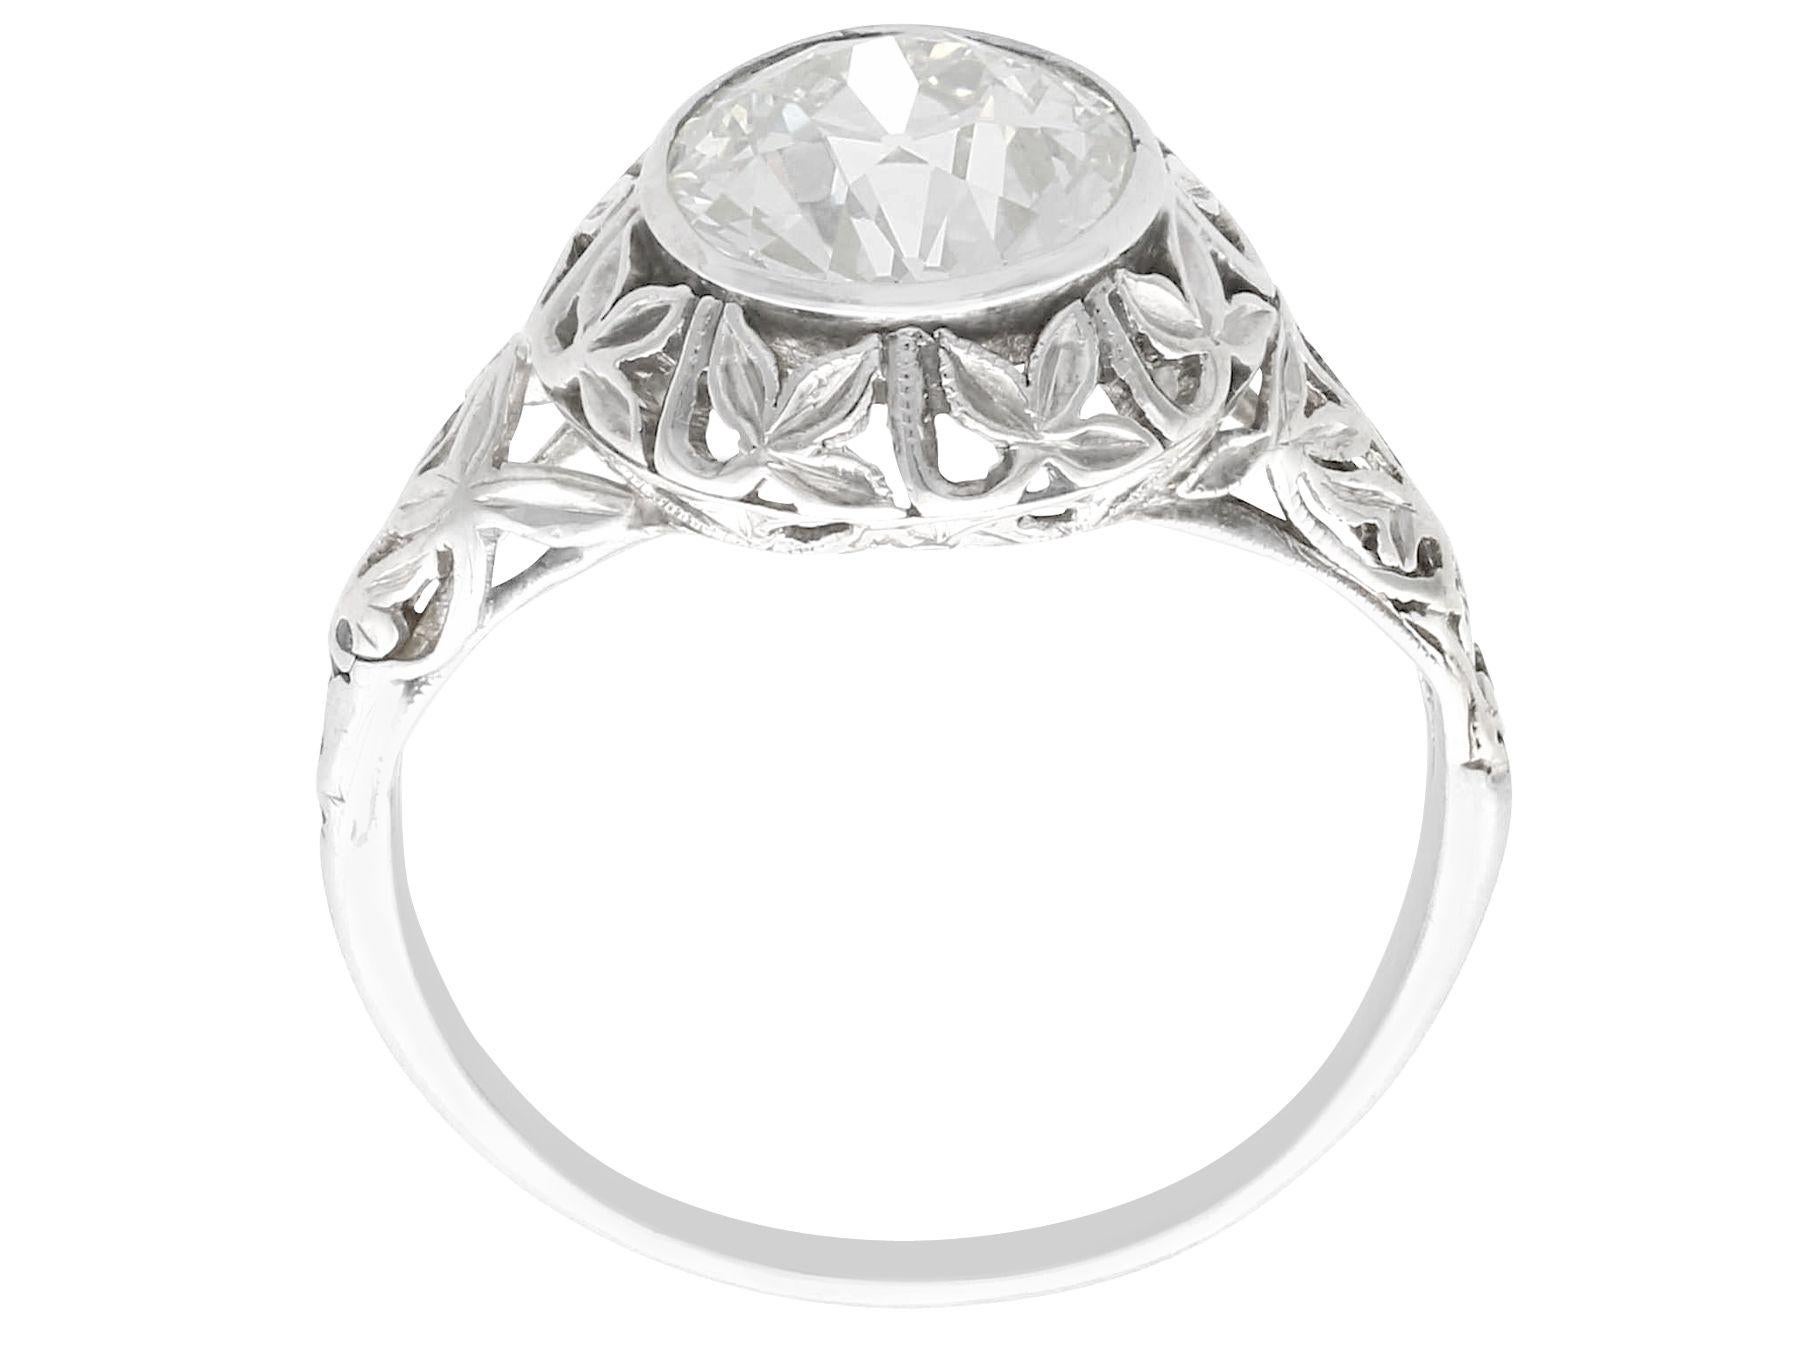 1.70 Carat Diamond and 18 K White Gold Solitaire Ring, Antique circa 1910 1